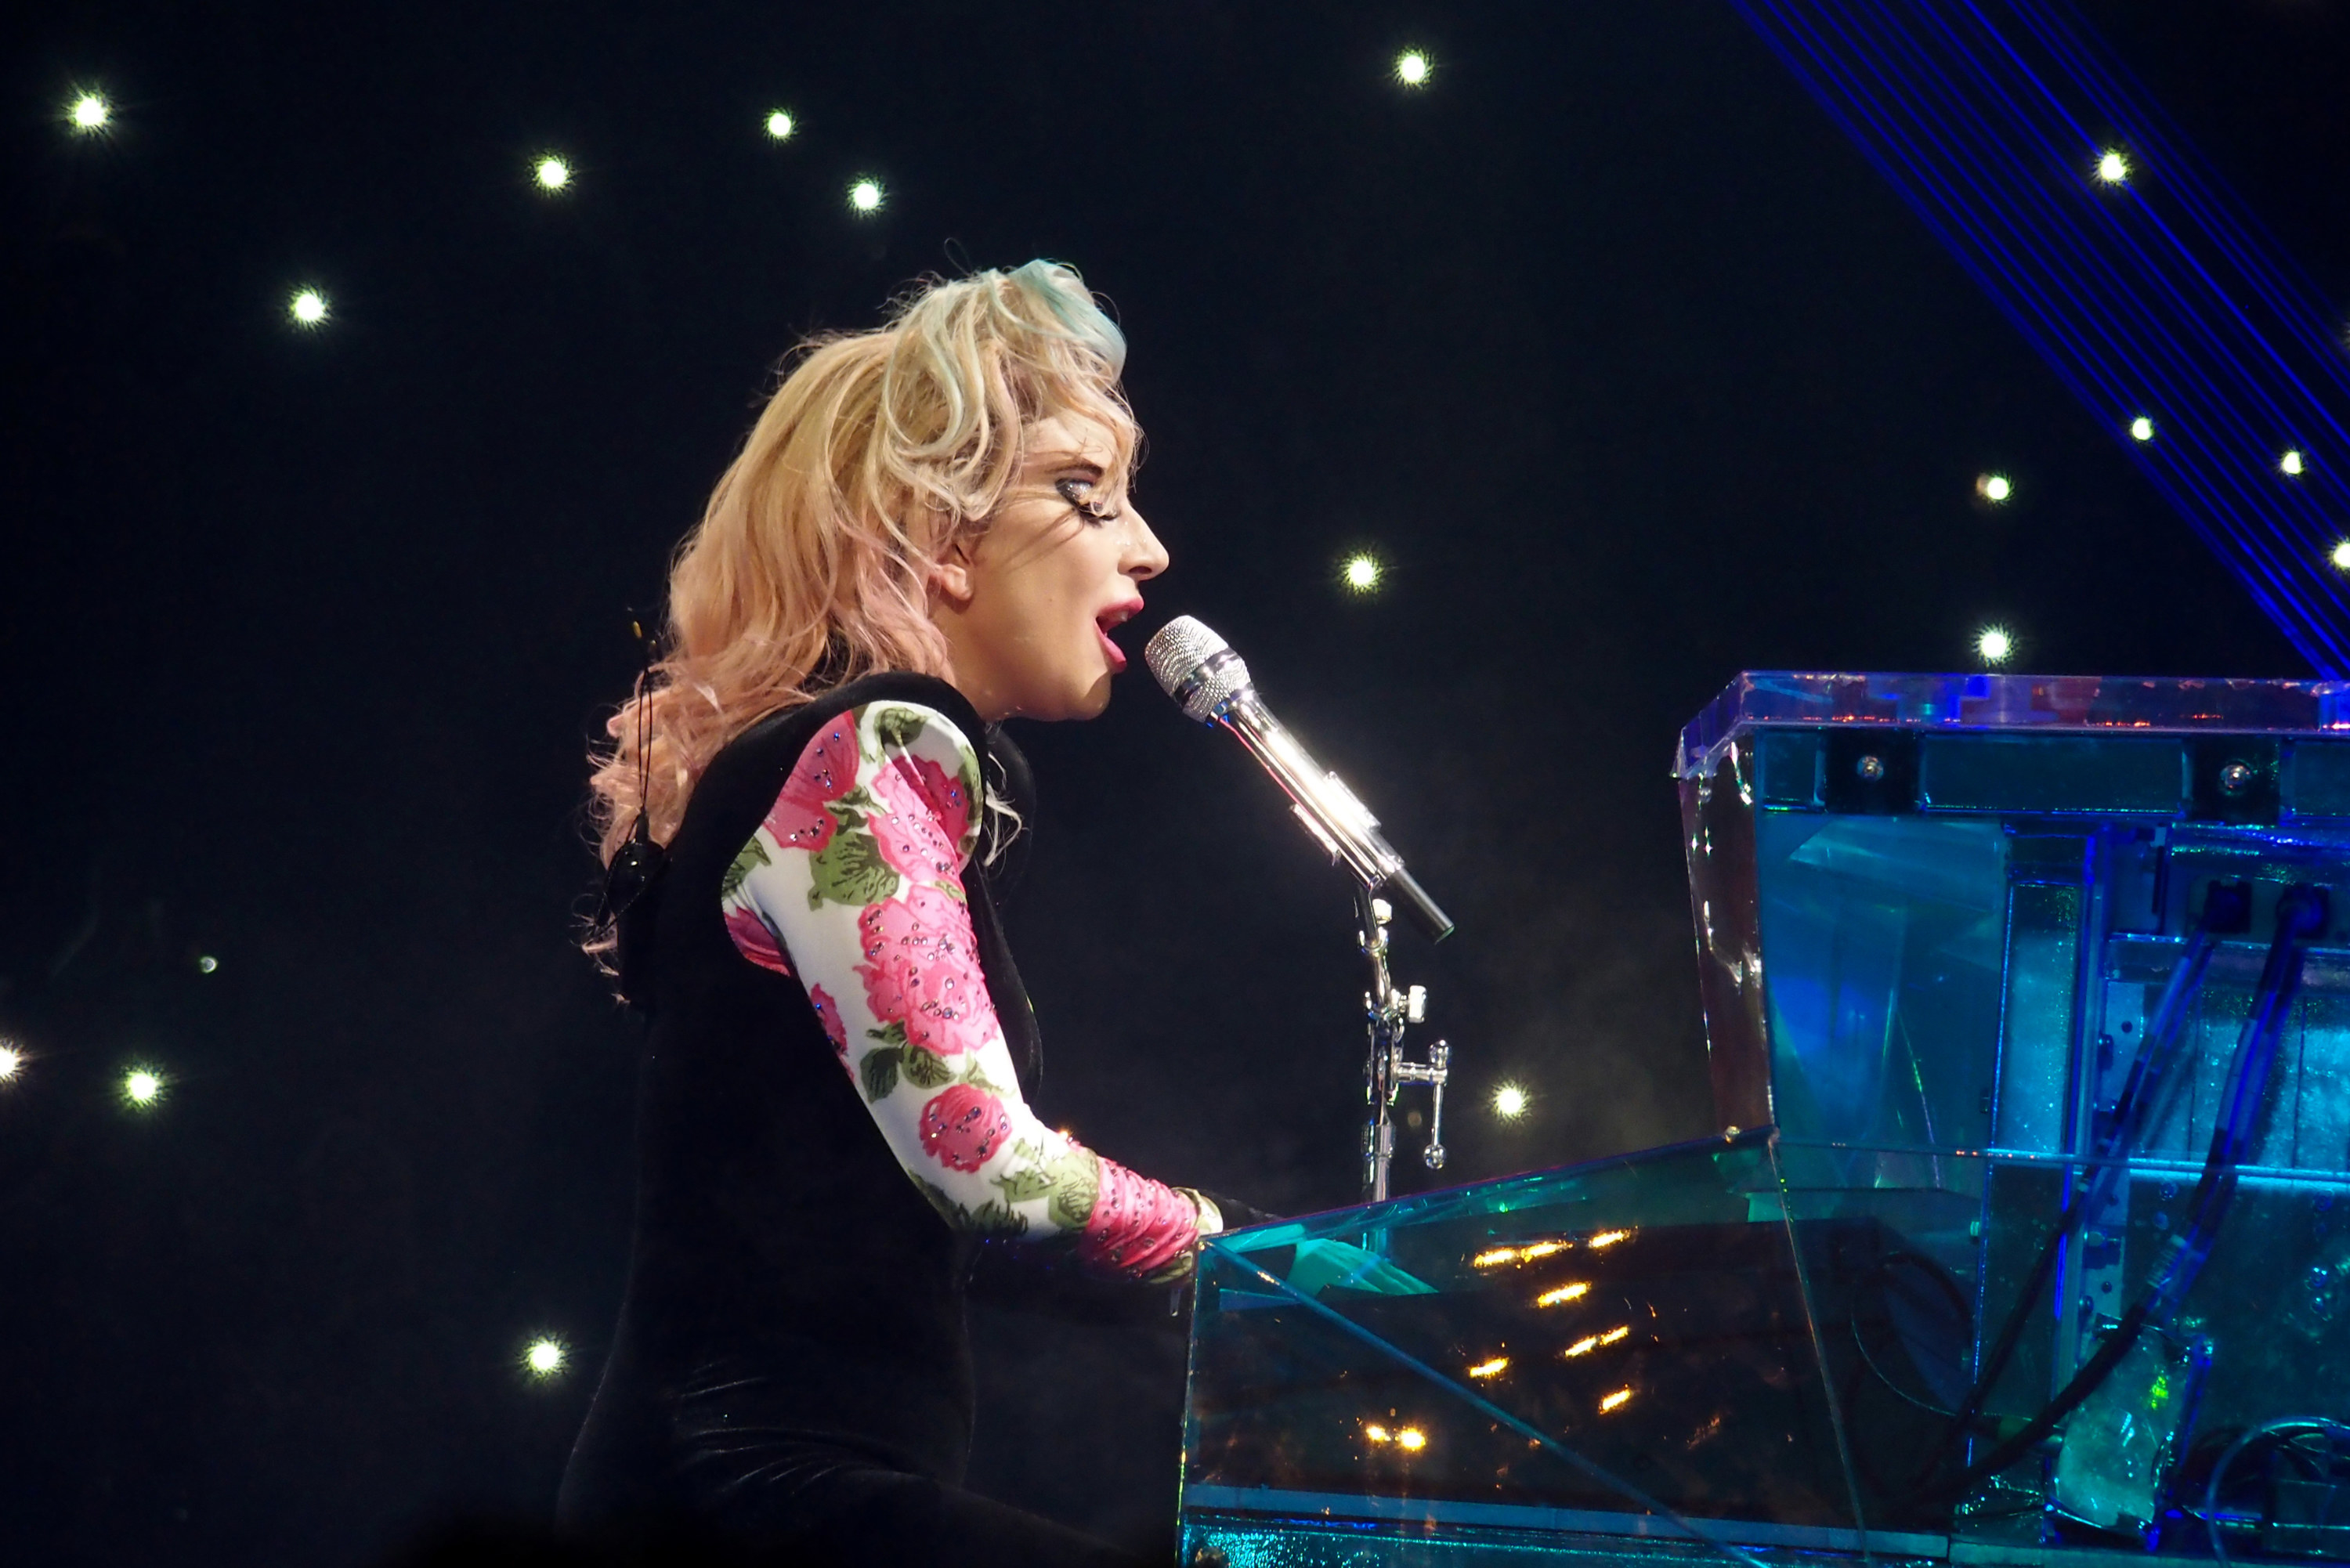 Lady Gaga on stage playing a piano